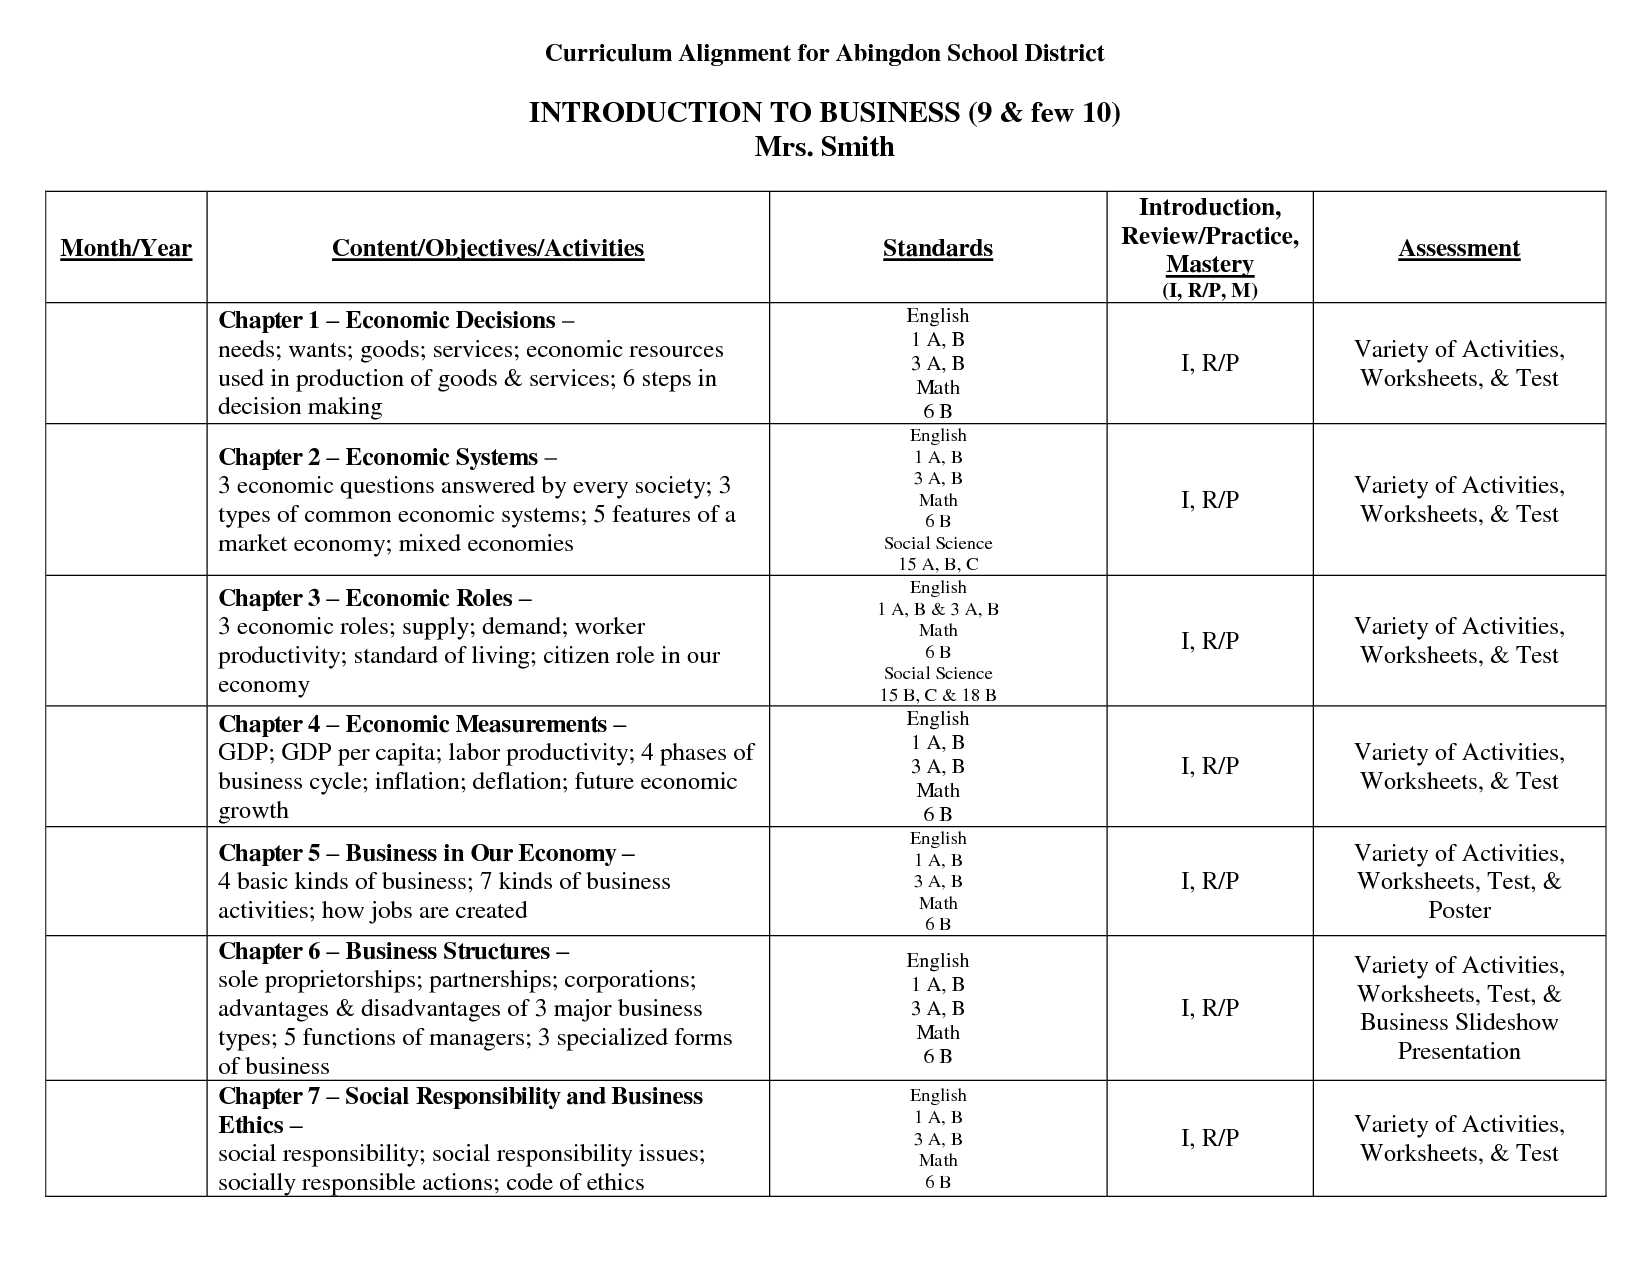 Supply and Demand Worksheet Pdf as Well as Collection Of College Math Worksheets Pdf